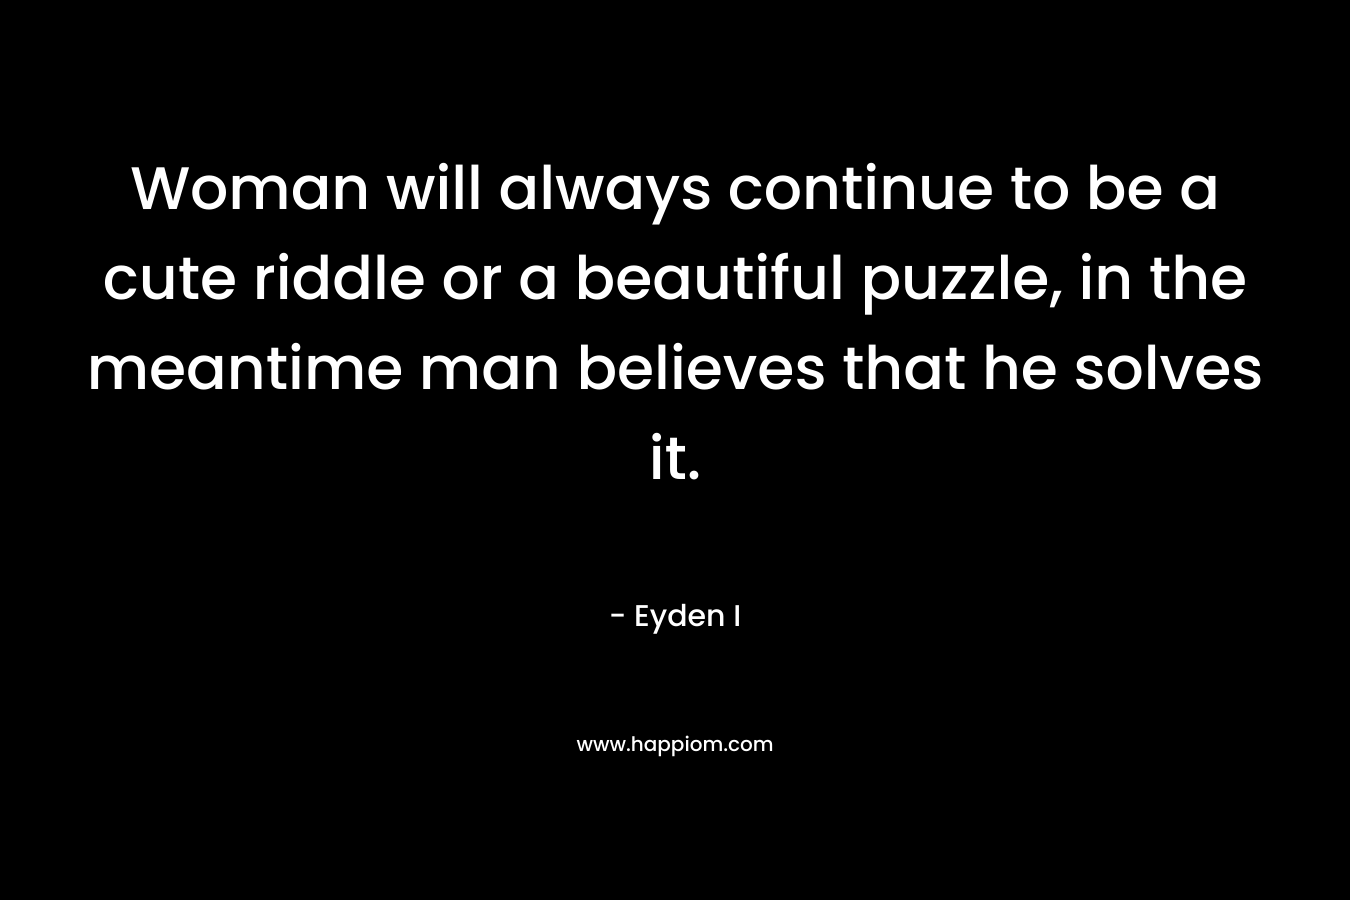 Woman will always continue to be a cute riddle or a beautiful puzzle, in the meantime man believes that he solves it.